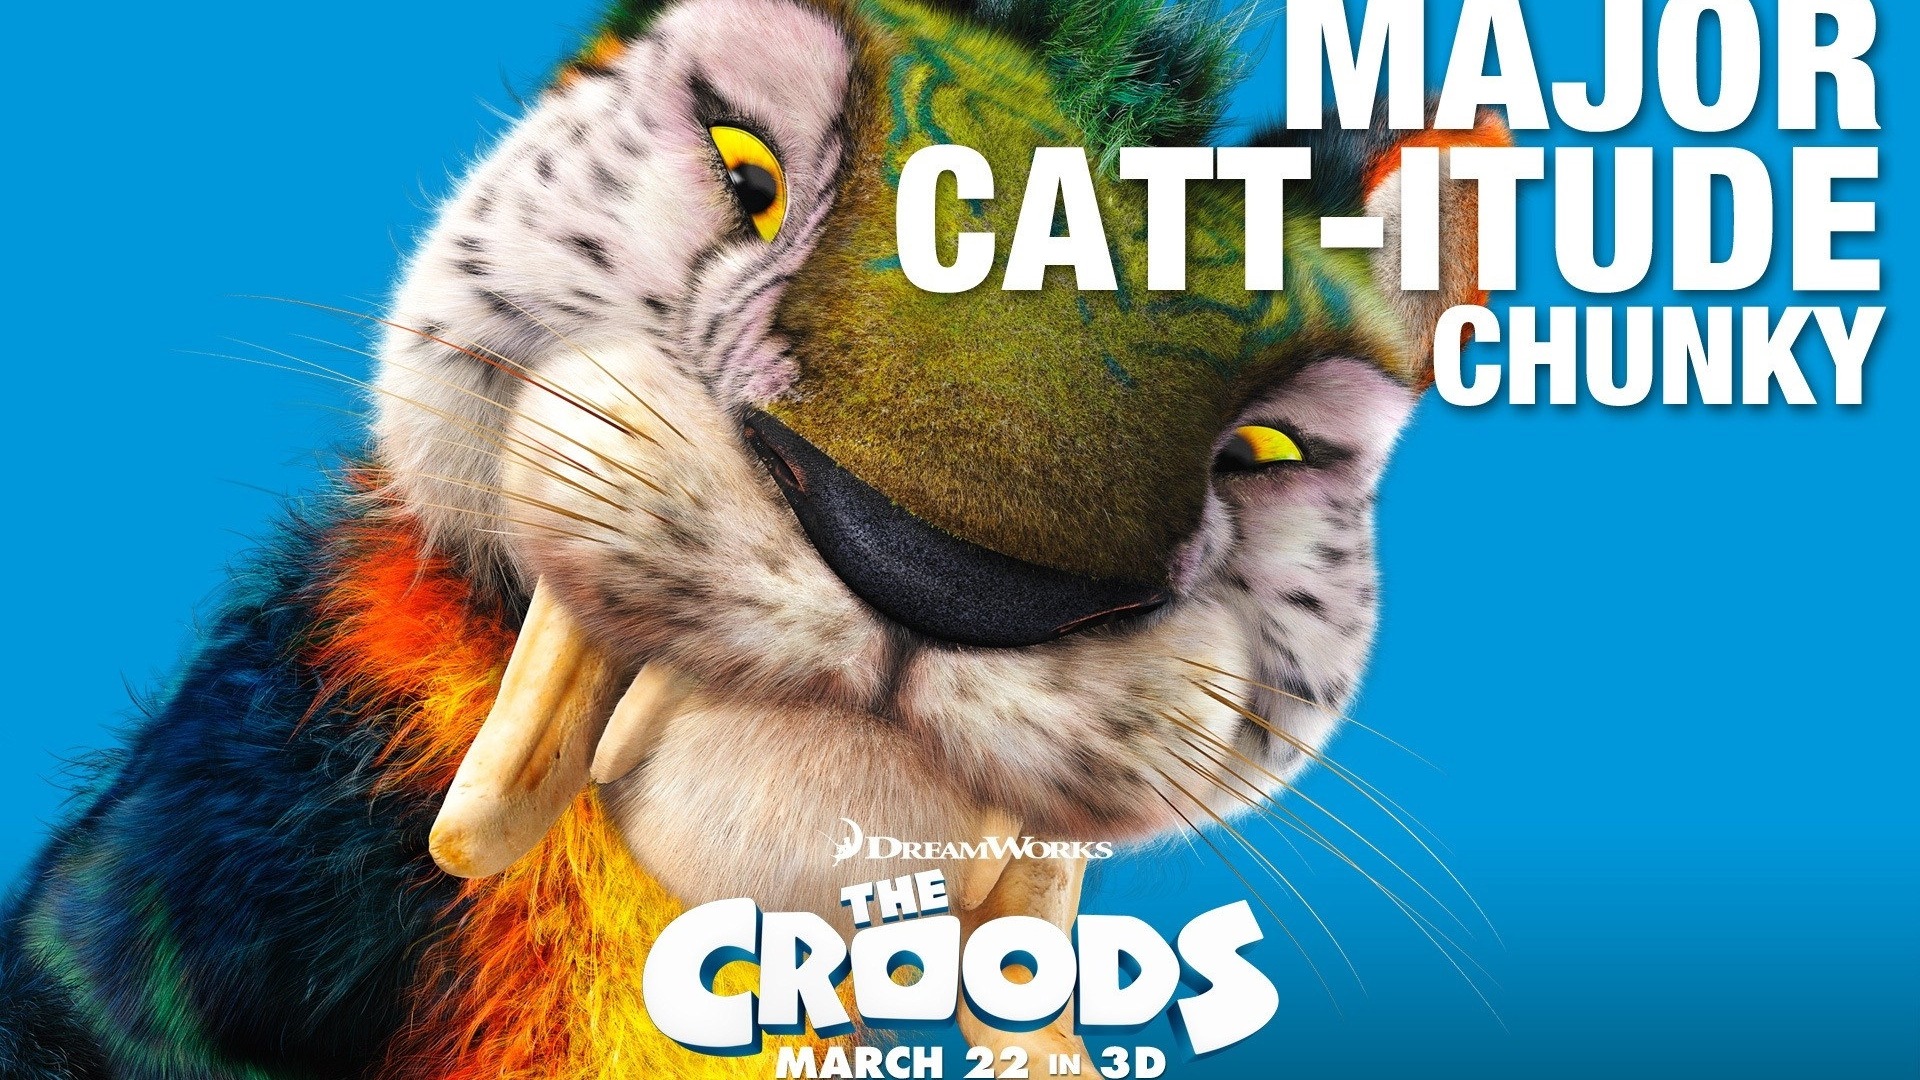 The Croods HD movie wallpapers #12 - 1920x1080